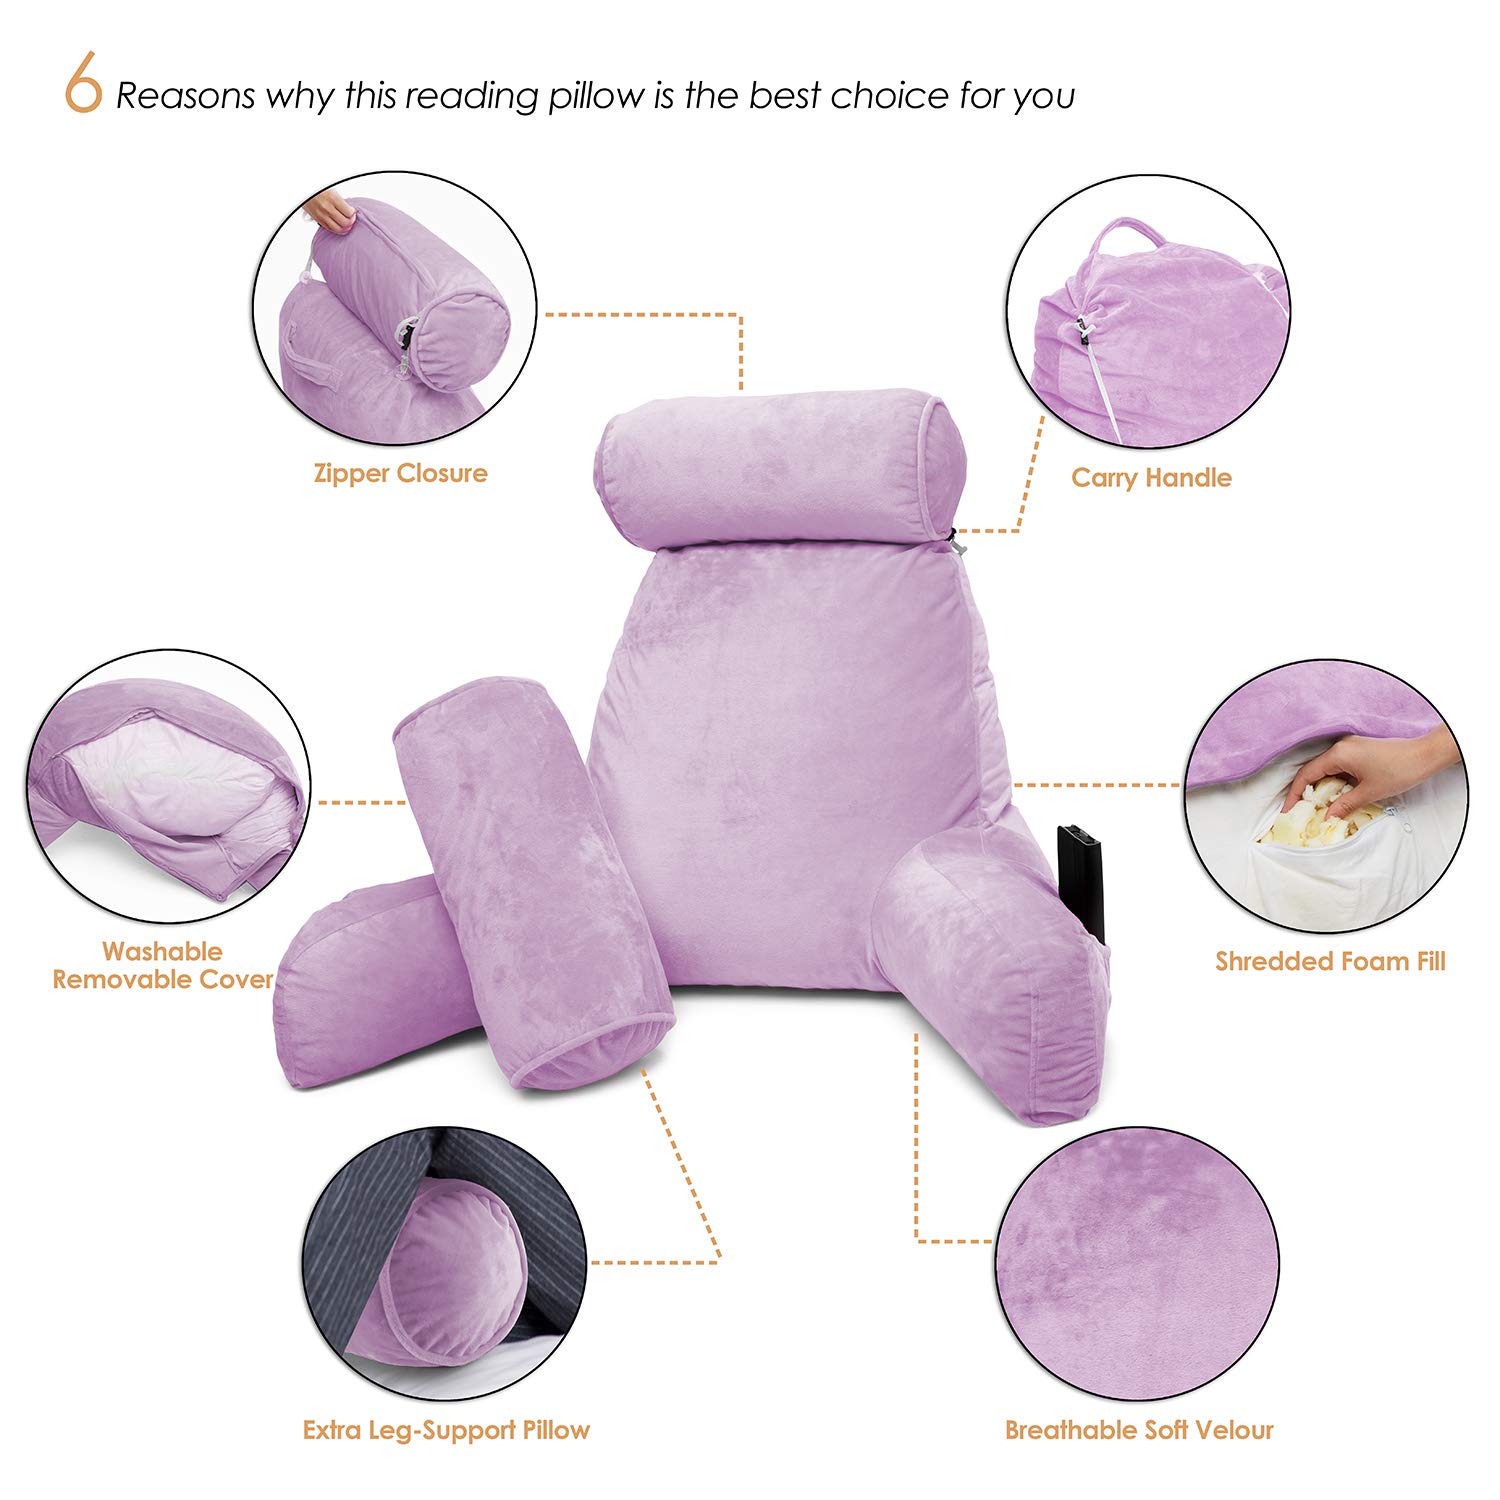 Clara Clark Bed Rest Reading Pillow with Arms and Pockets - Premium Shredded Memory Foam TV Pillow, Detachable Neck Roll & Lumbar Support Pillow, Large, Light Purple - image 2 of 7